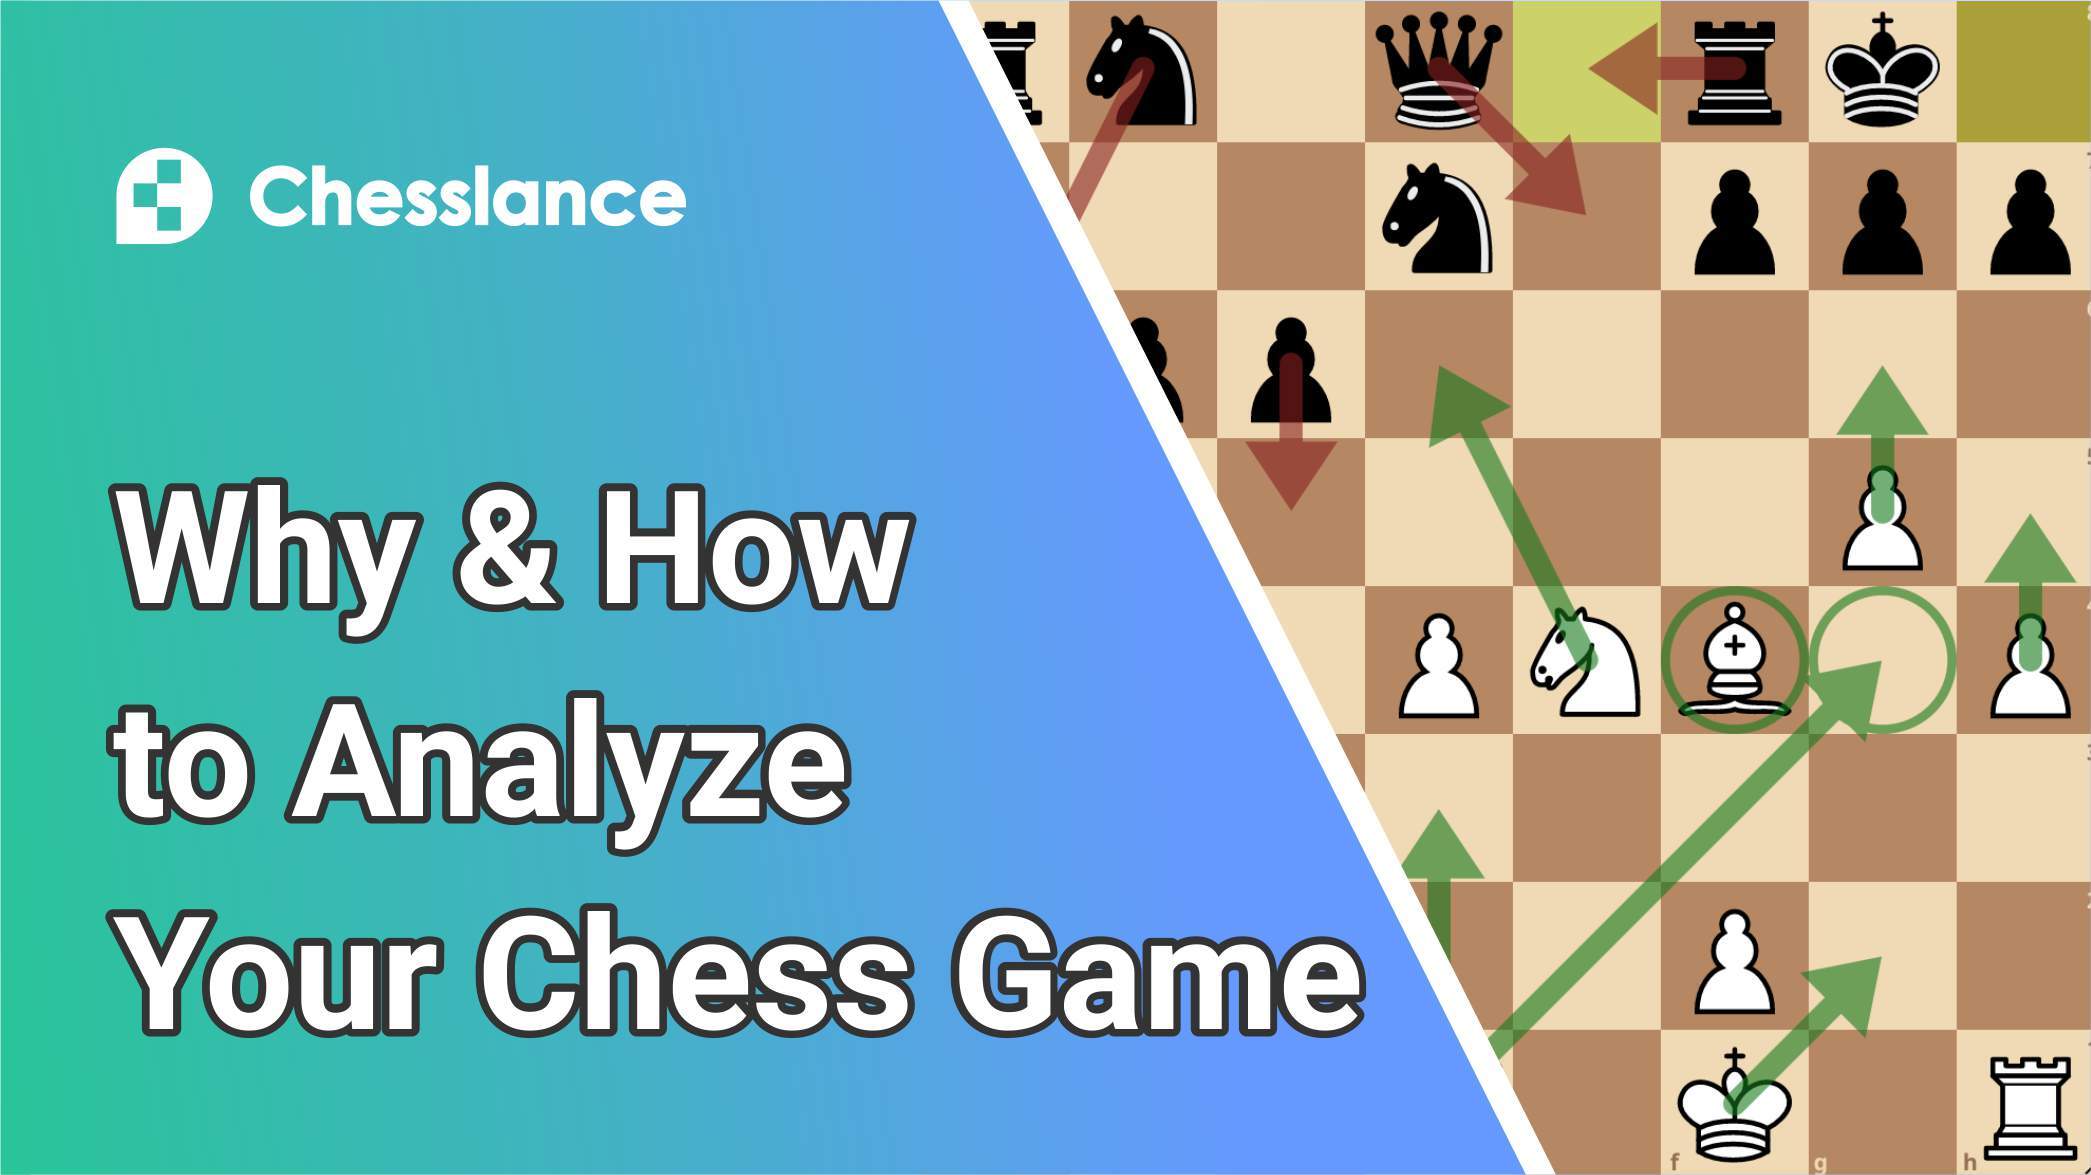 Why you should analyze your chess game? & How?